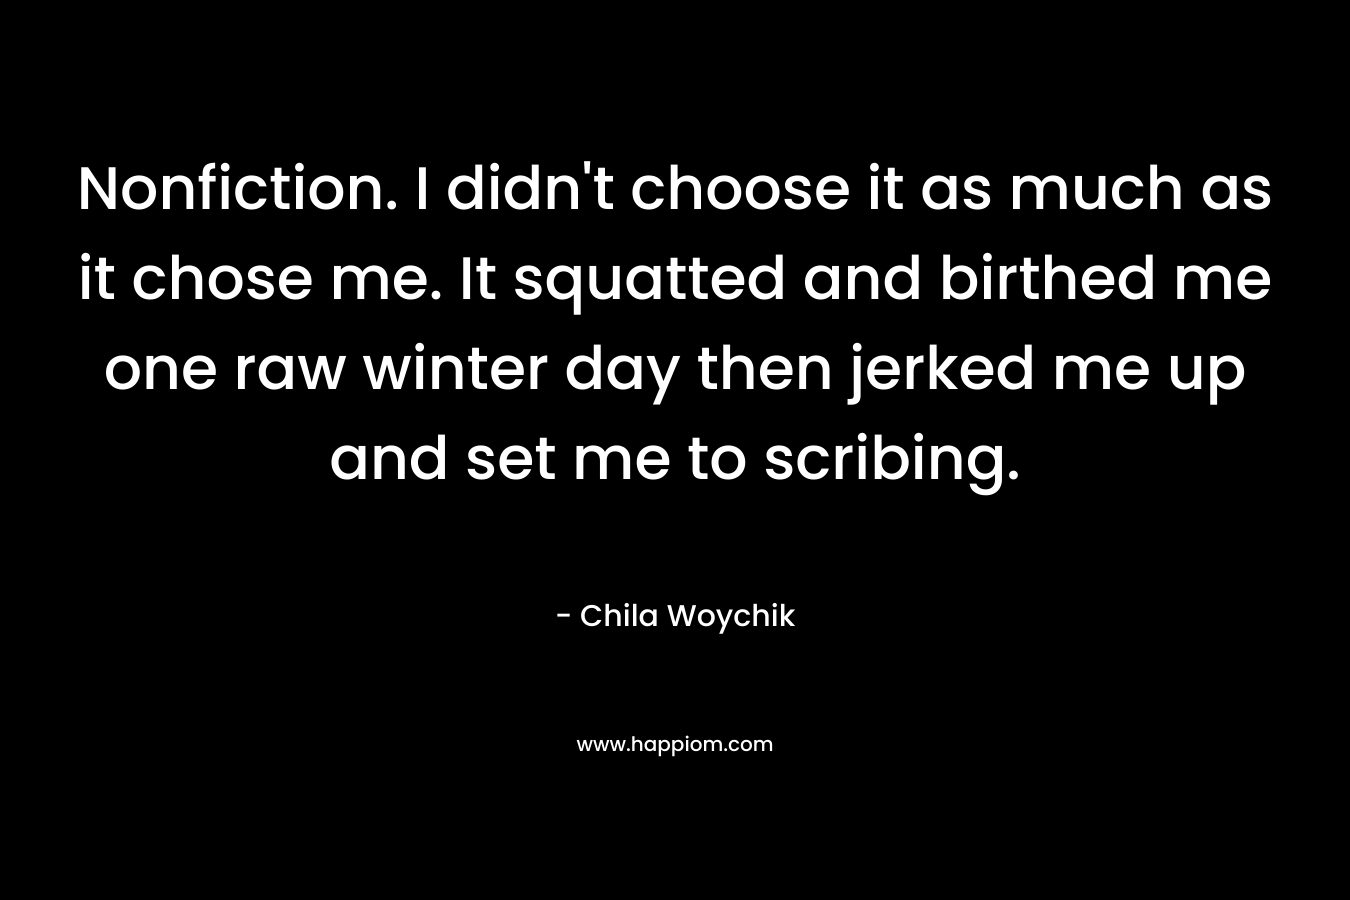 Nonfiction. I didn’t choose it as much as it chose me. It squatted and birthed me one raw winter day then jerked me up and set me to scribing. – Chila Woychik